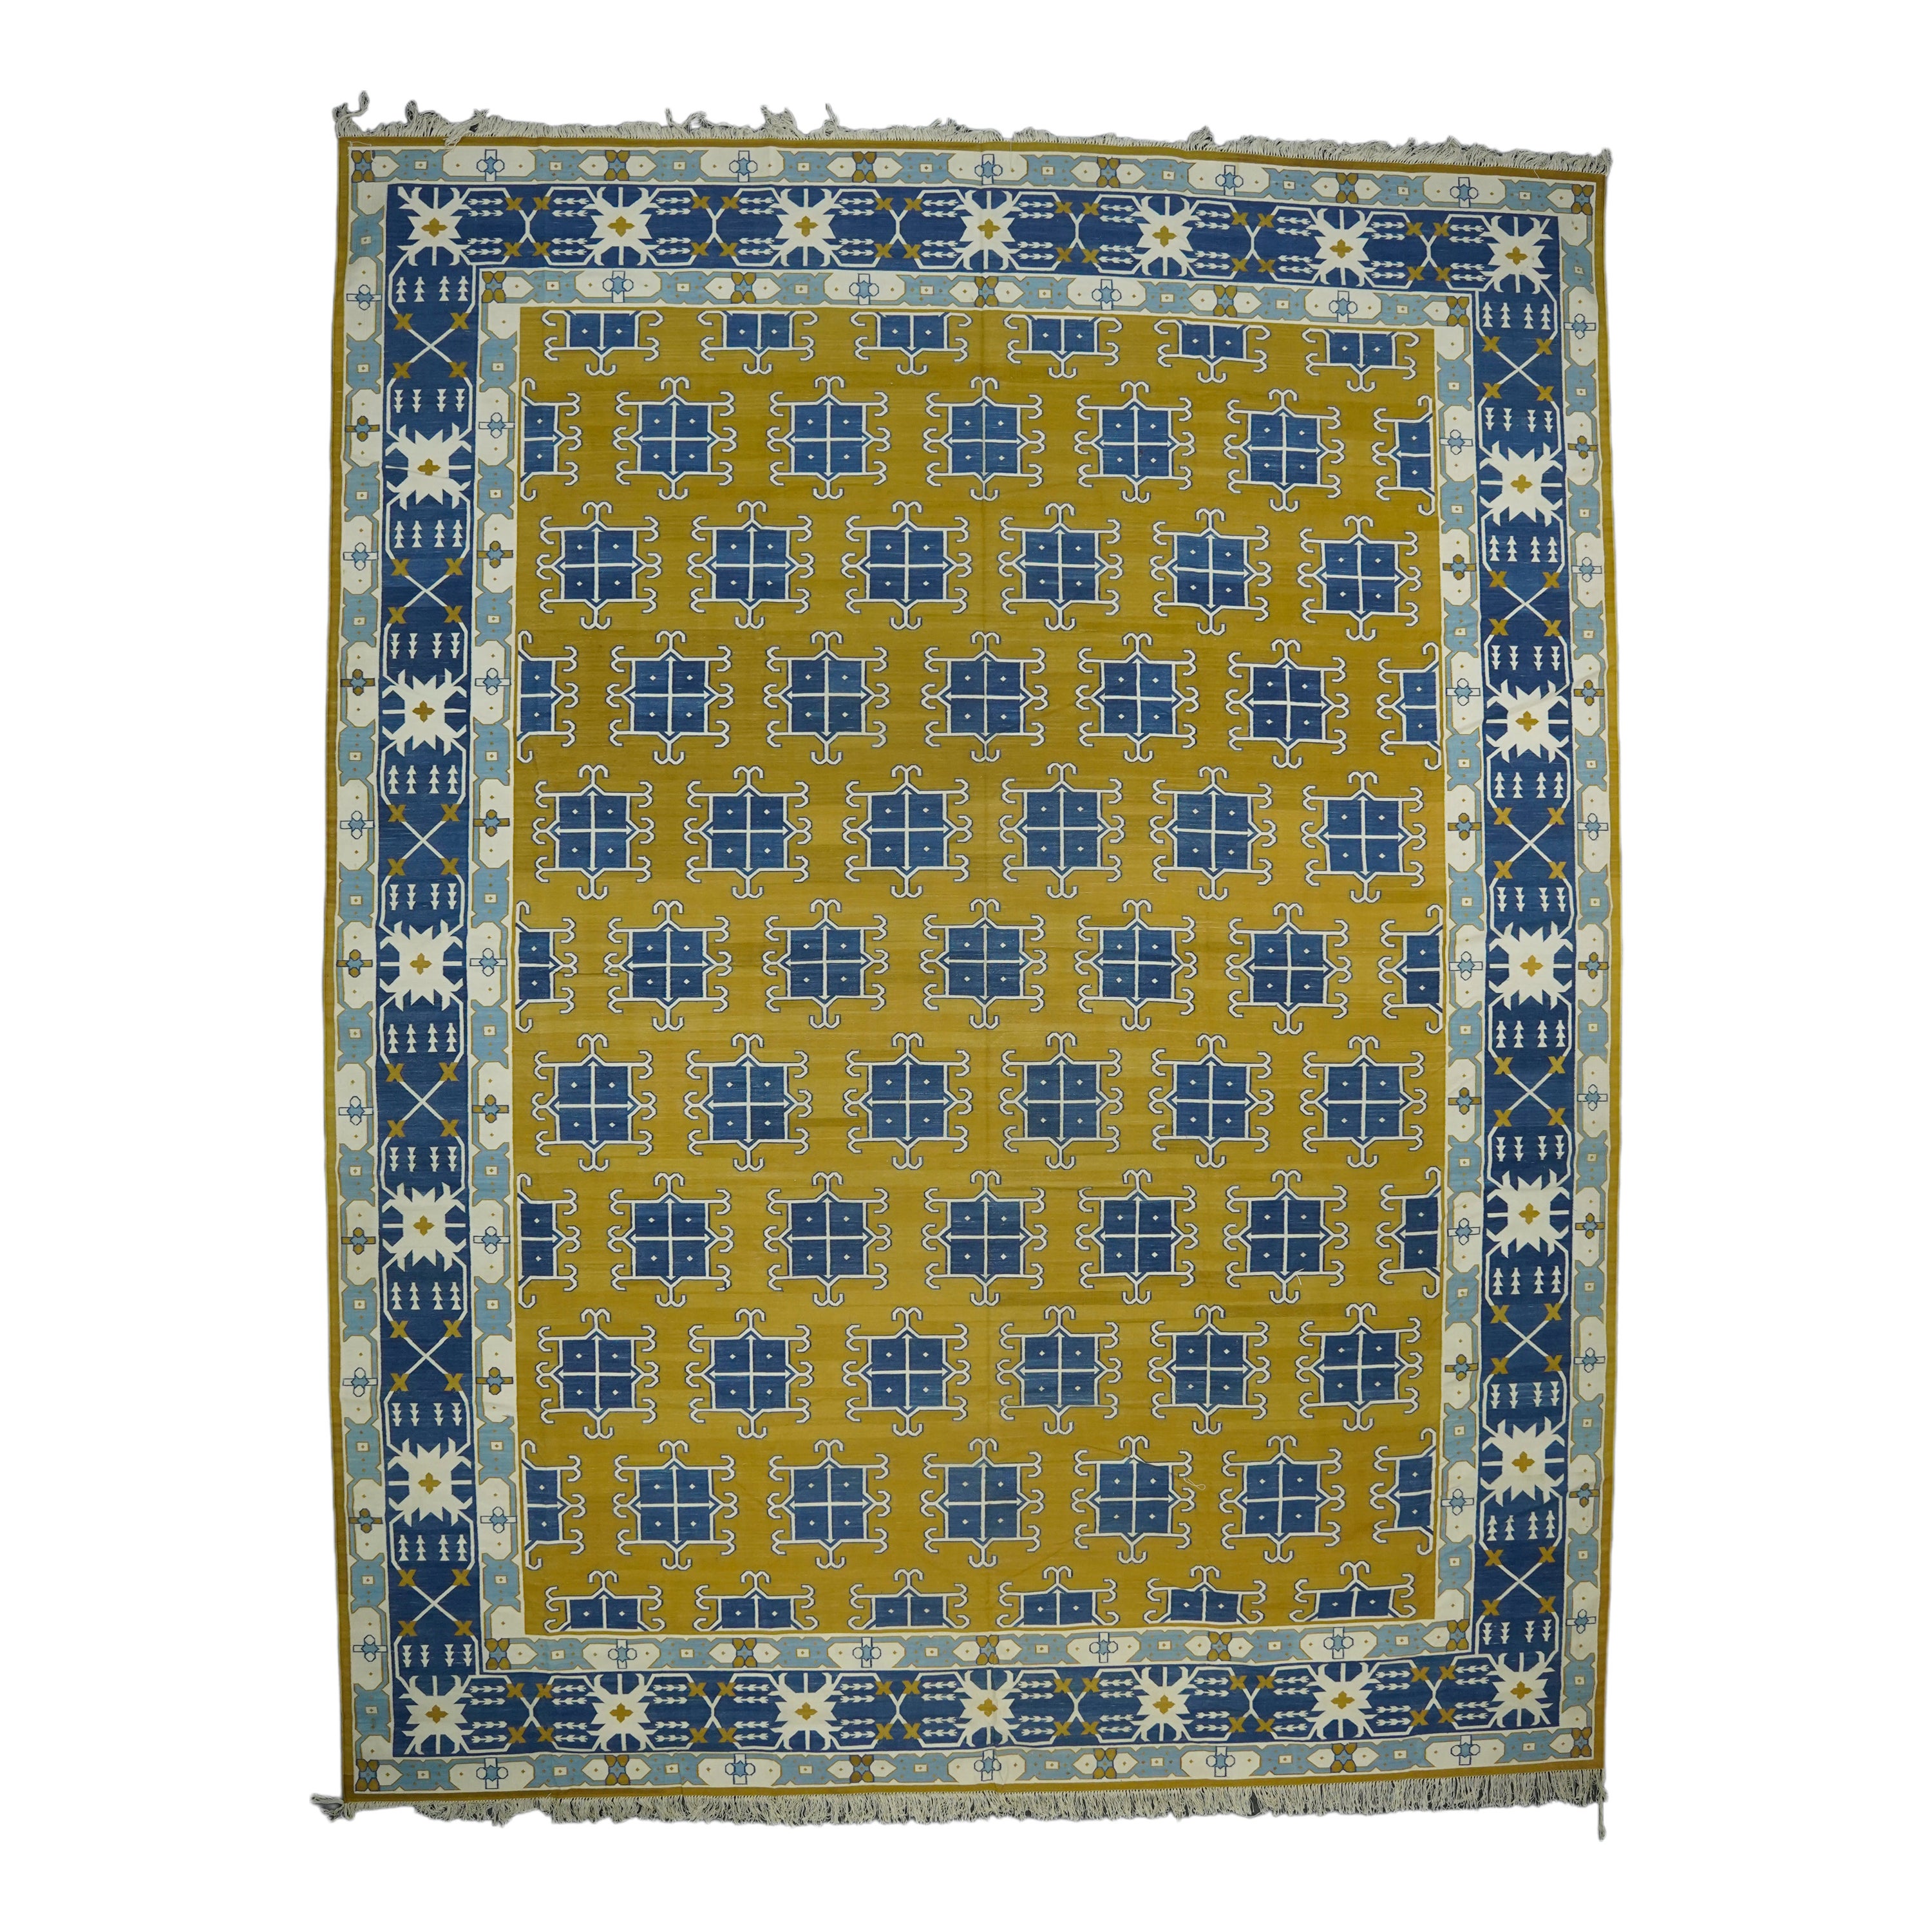 Vintage Dhurrie Rug in Gold and Blue Geometric Pattern, from Rug & Kilim   